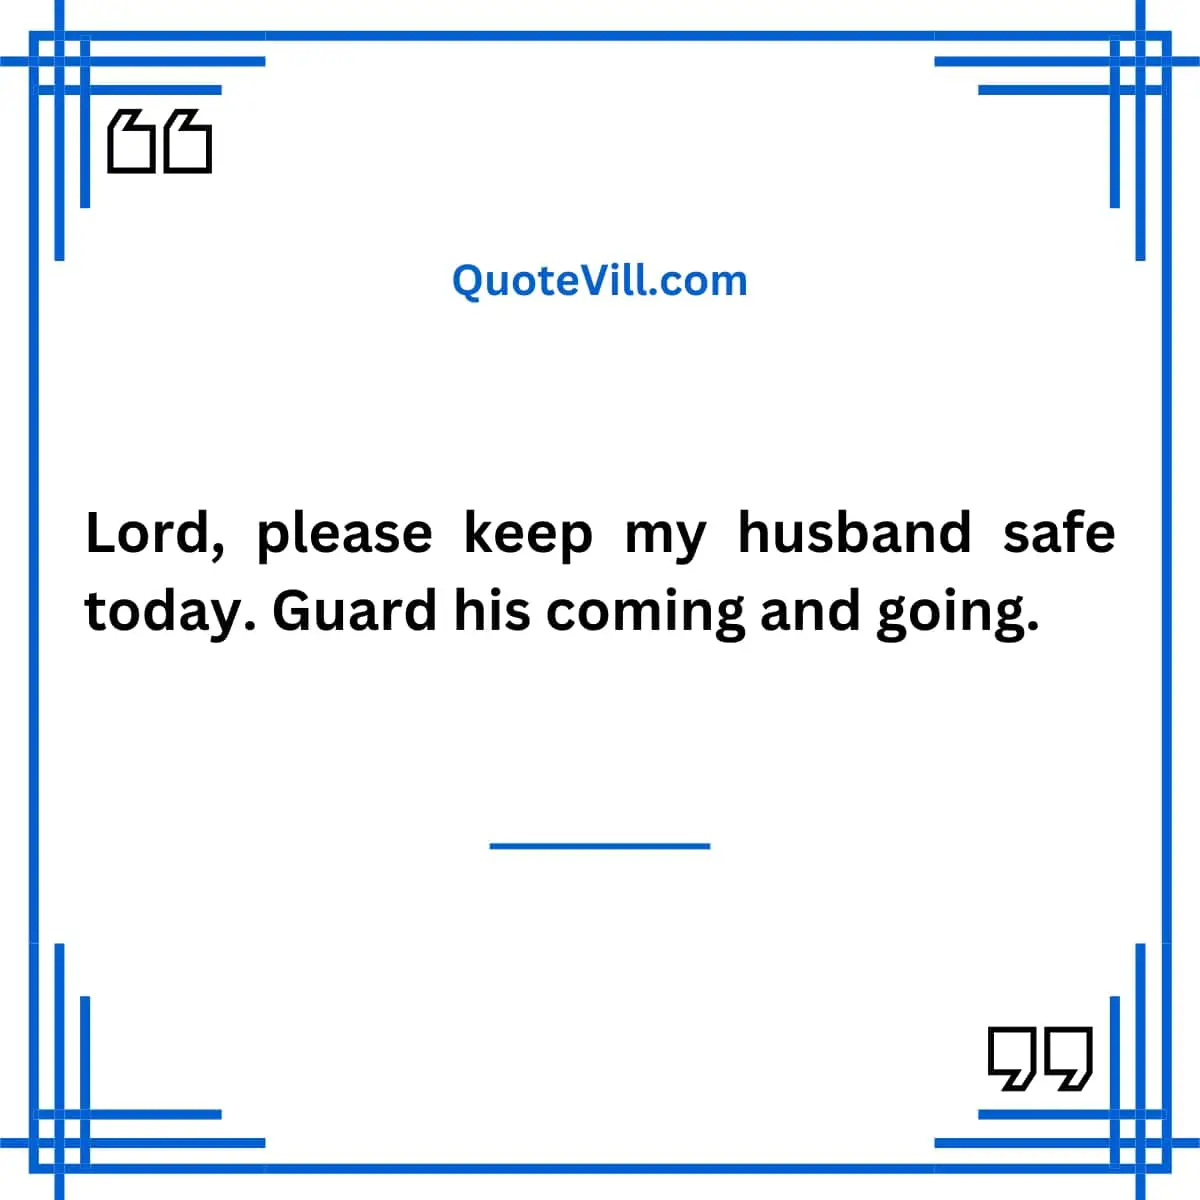 Quick-Morning-Prayer-For-Husbands-Peaceful-Day